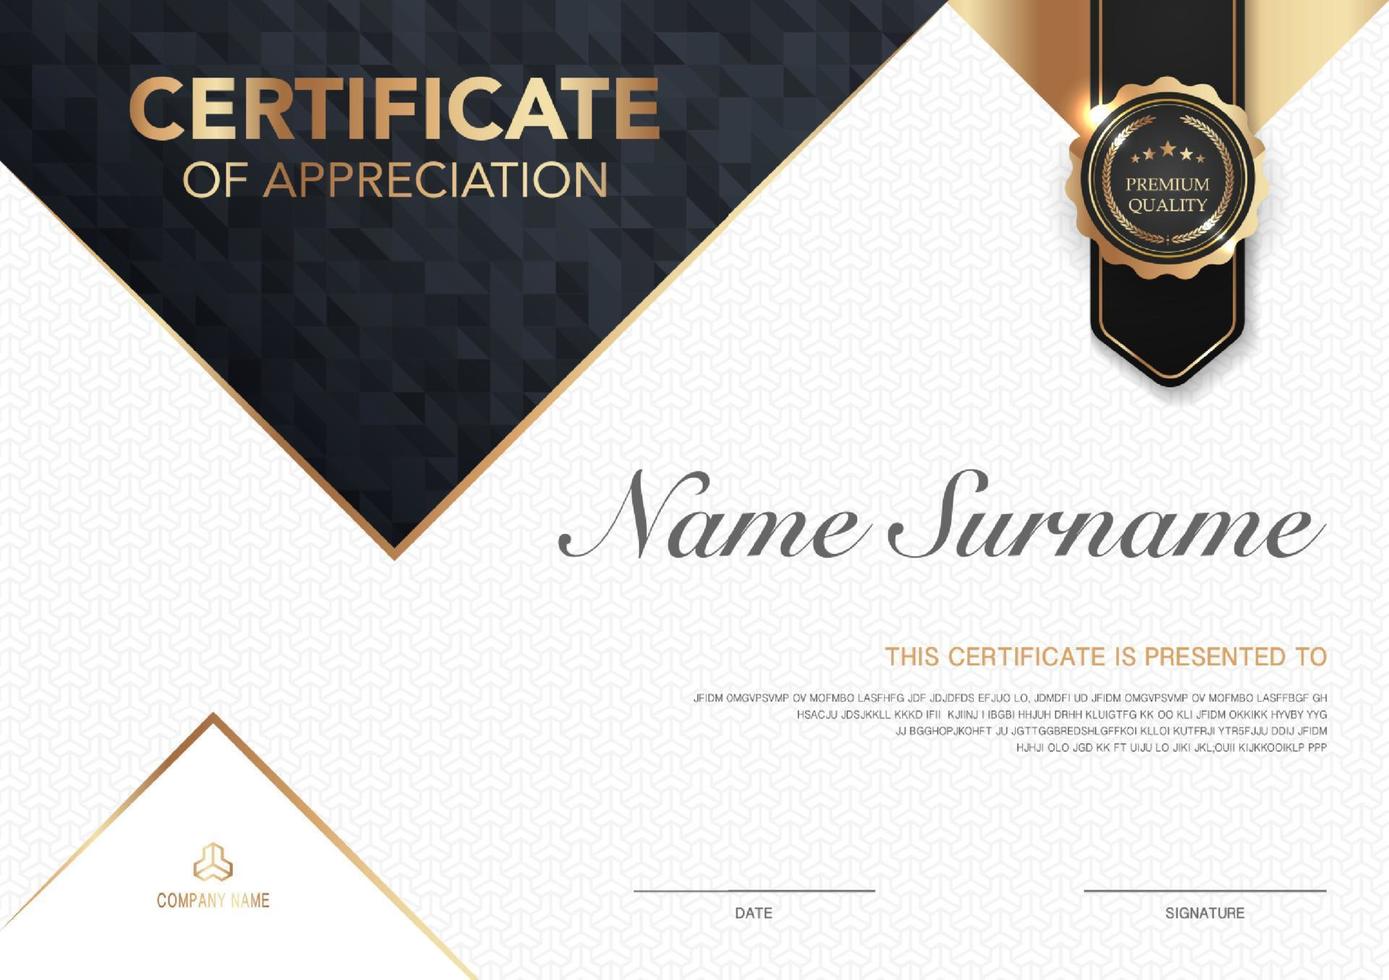 Certificate template black and gold luxury style image. Diploma of geometric modern design. eps10 vector. vector